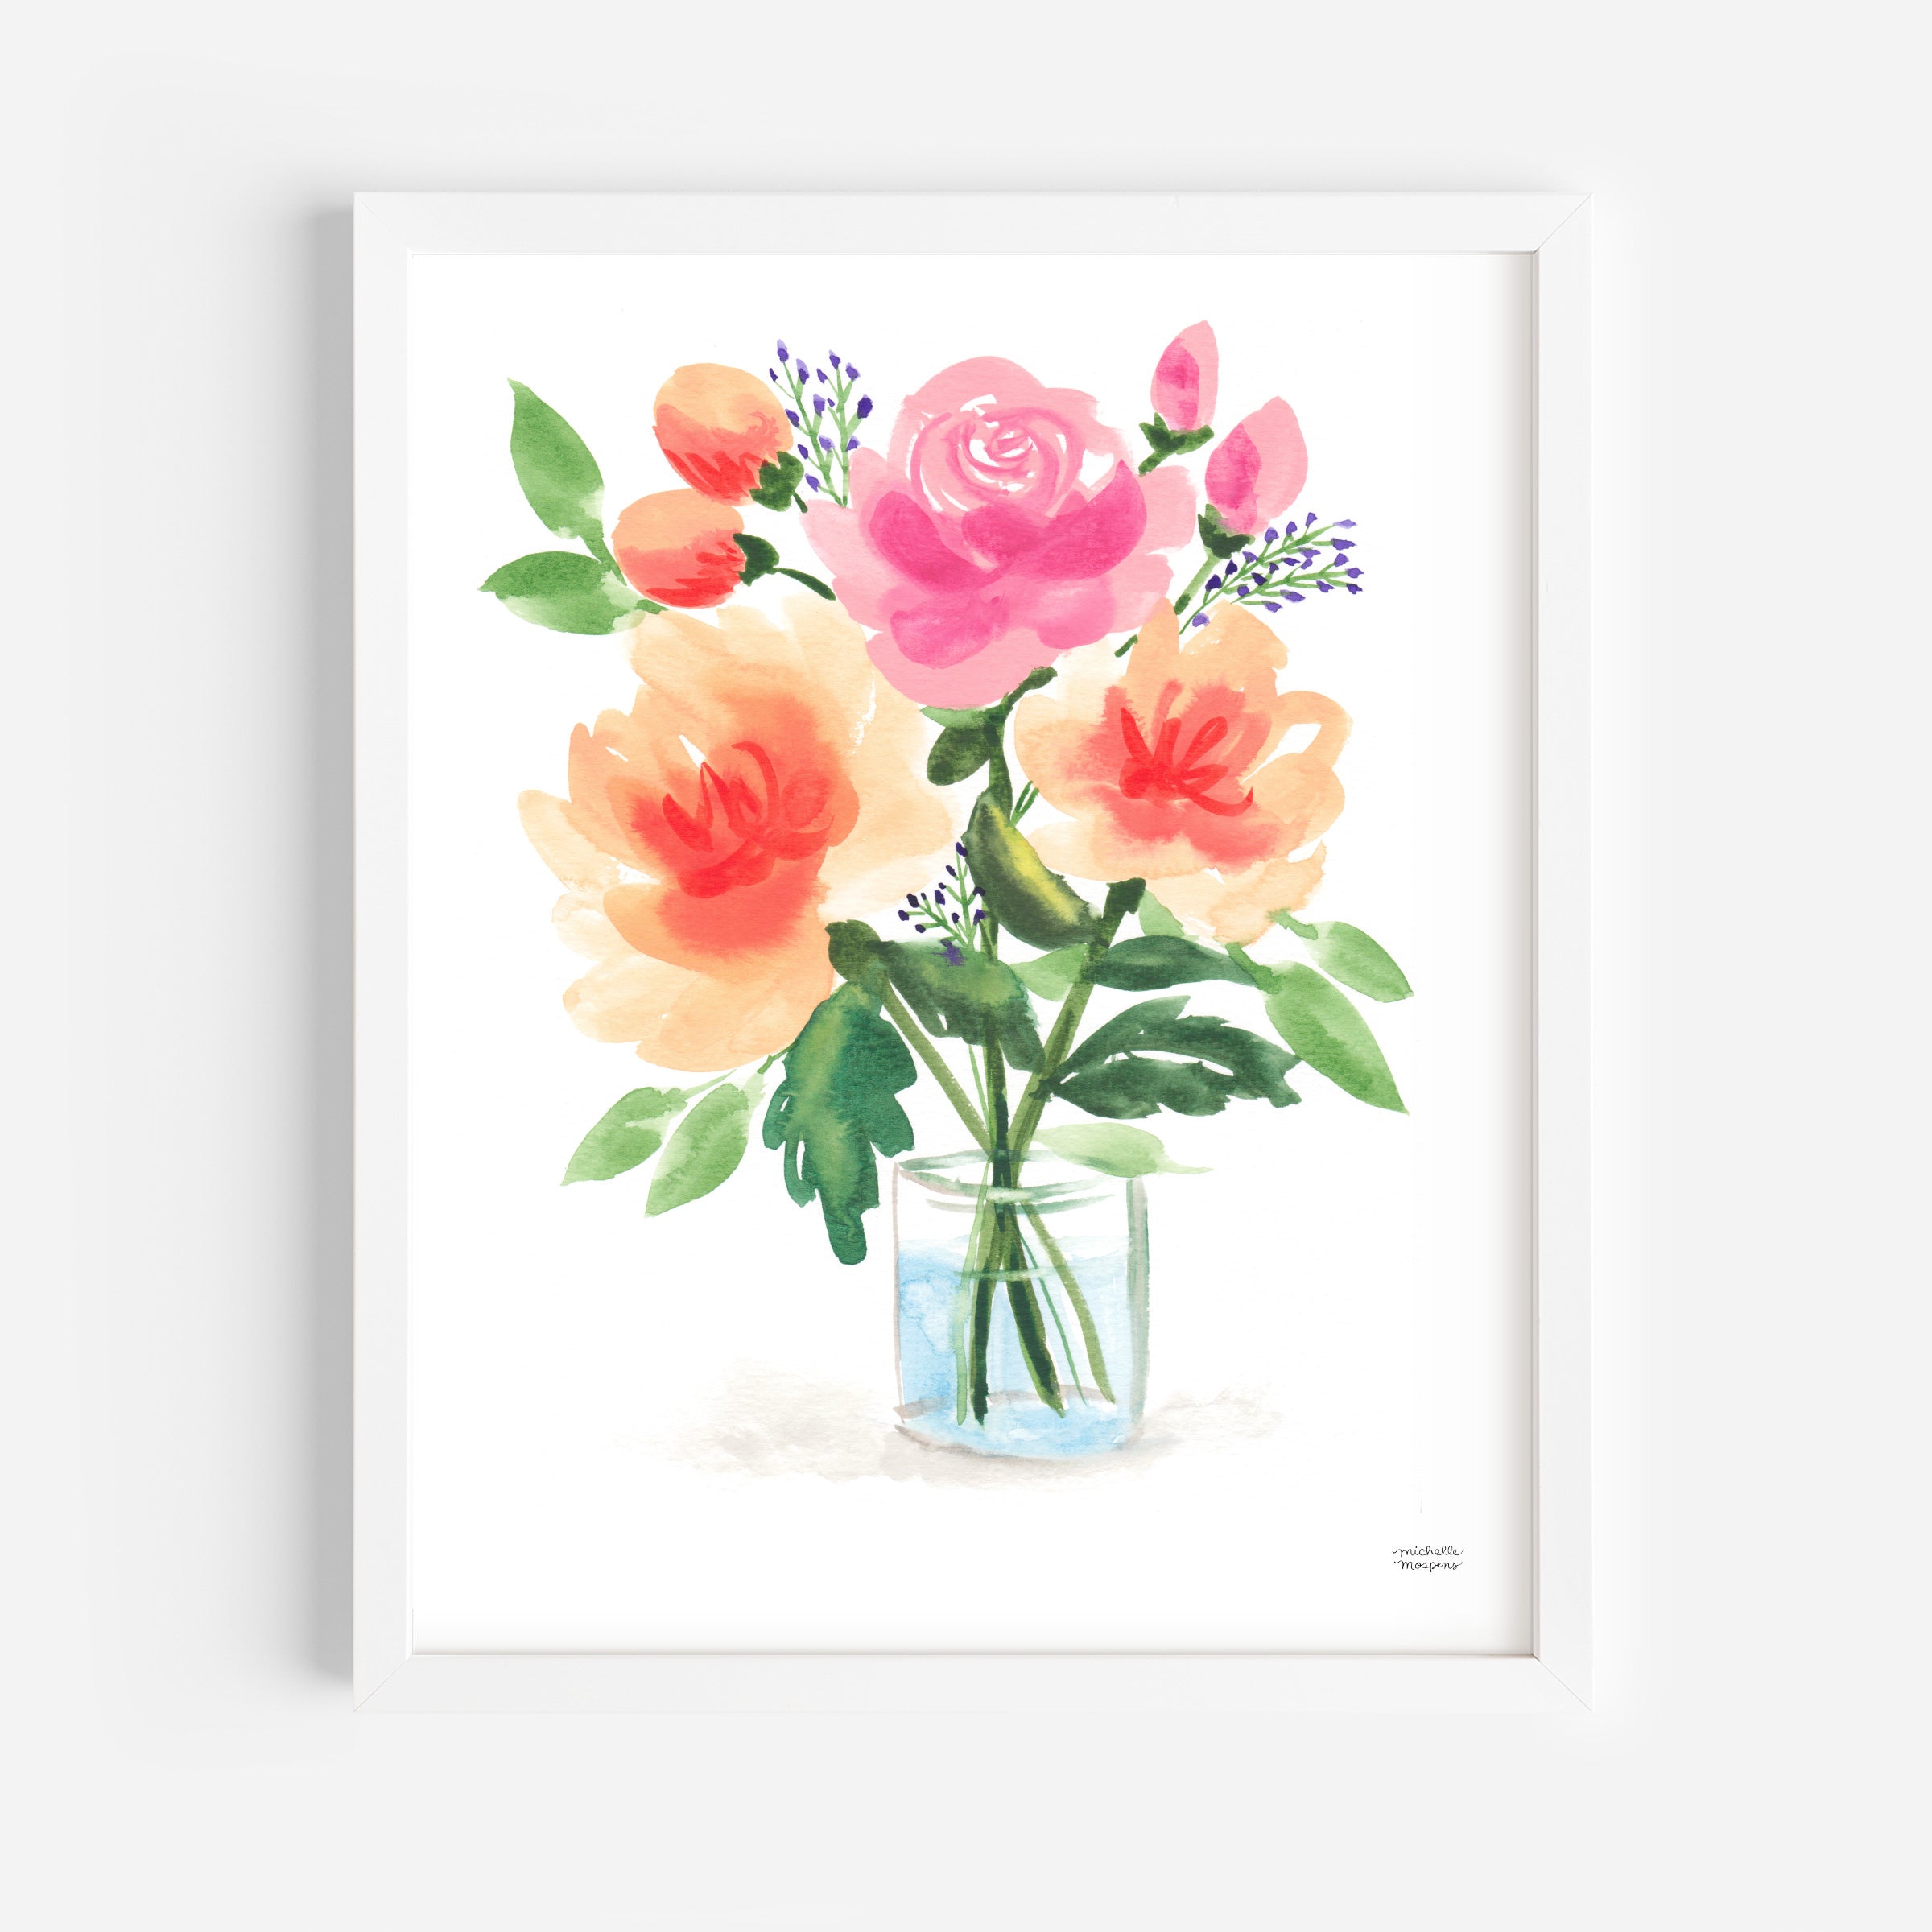 Painterly Peach Orange Peony Floral Bouquet Wall Art Print by Michelle Mospens